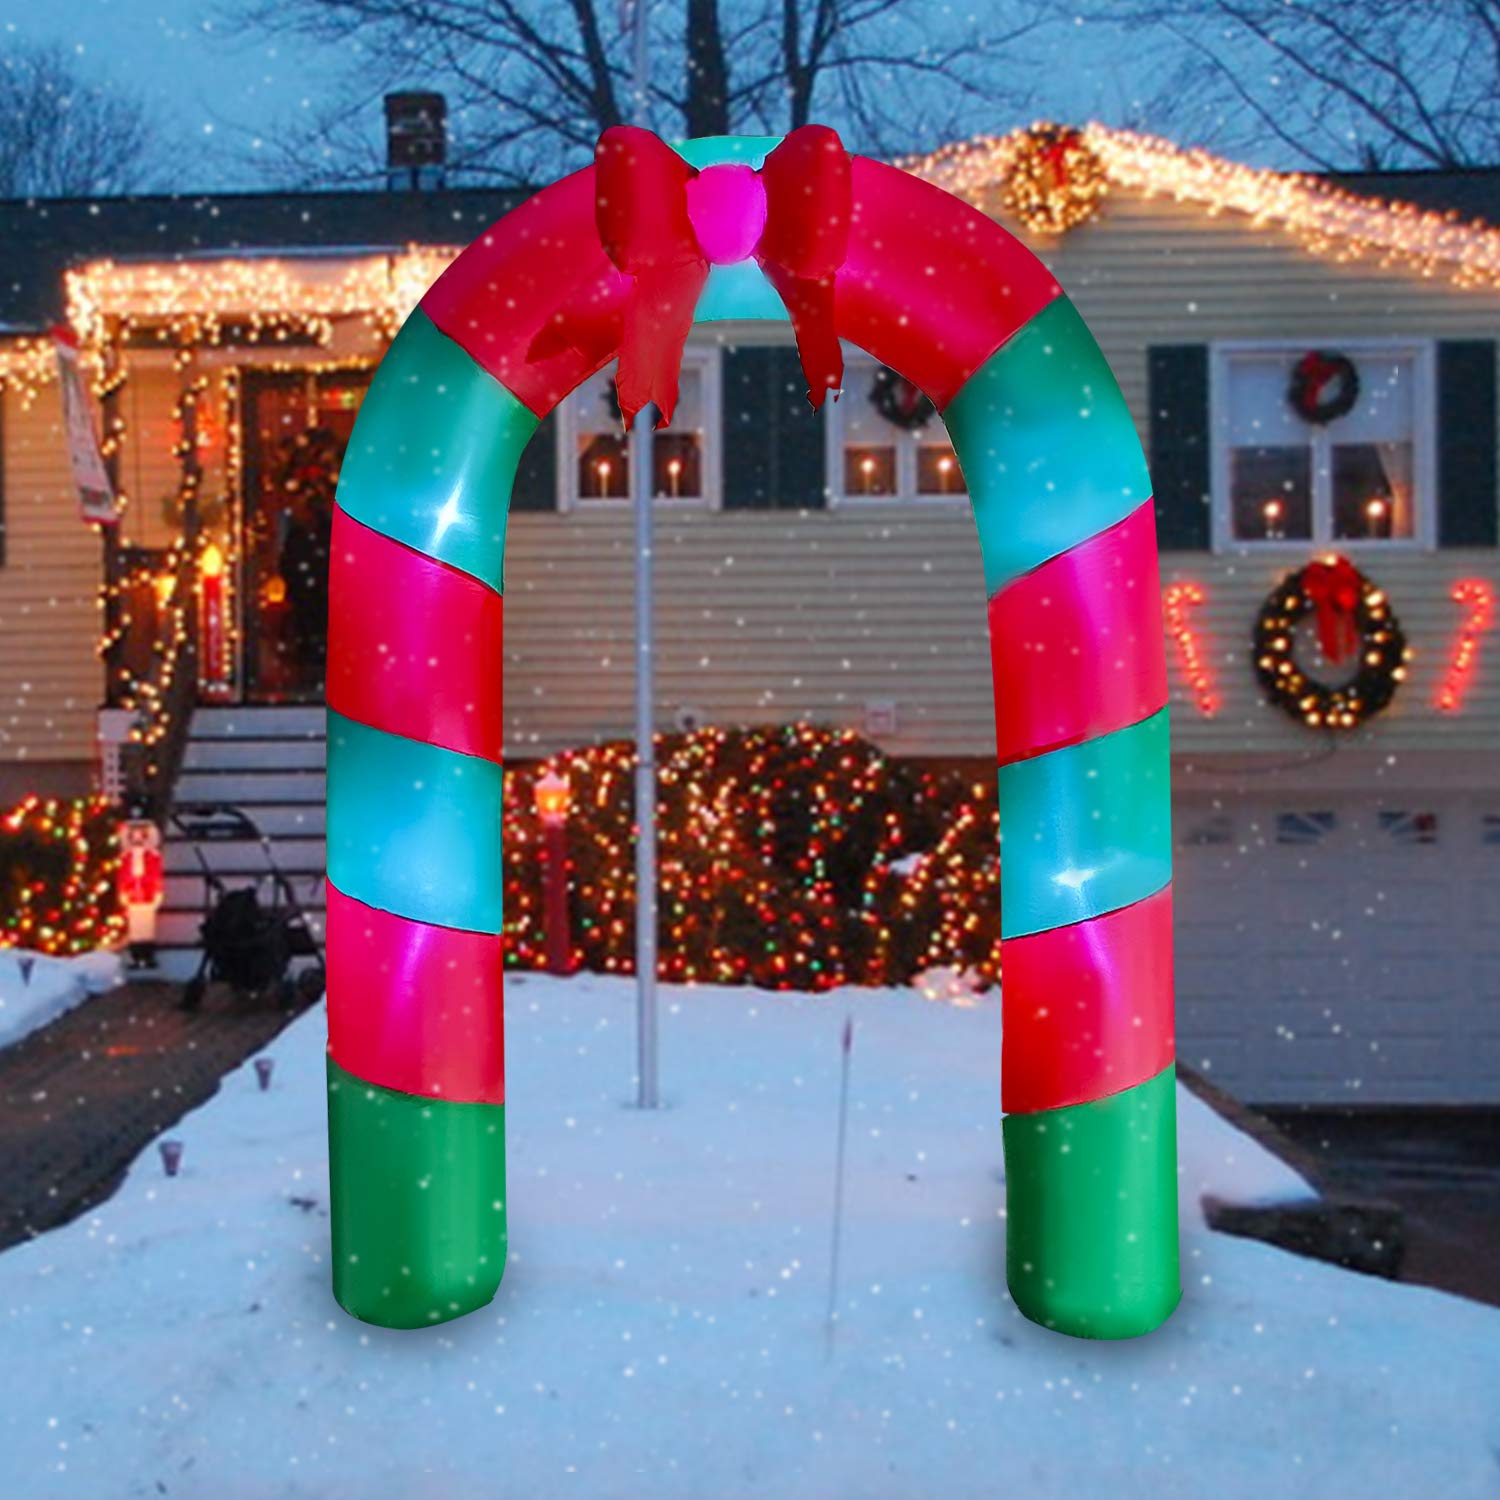 Great Choice Products 8 Ft Led Light Up Inflatable Christmas Candy Archway With Bow Decoration For Yard Lawn Garden Home Party Indoor Outdoor